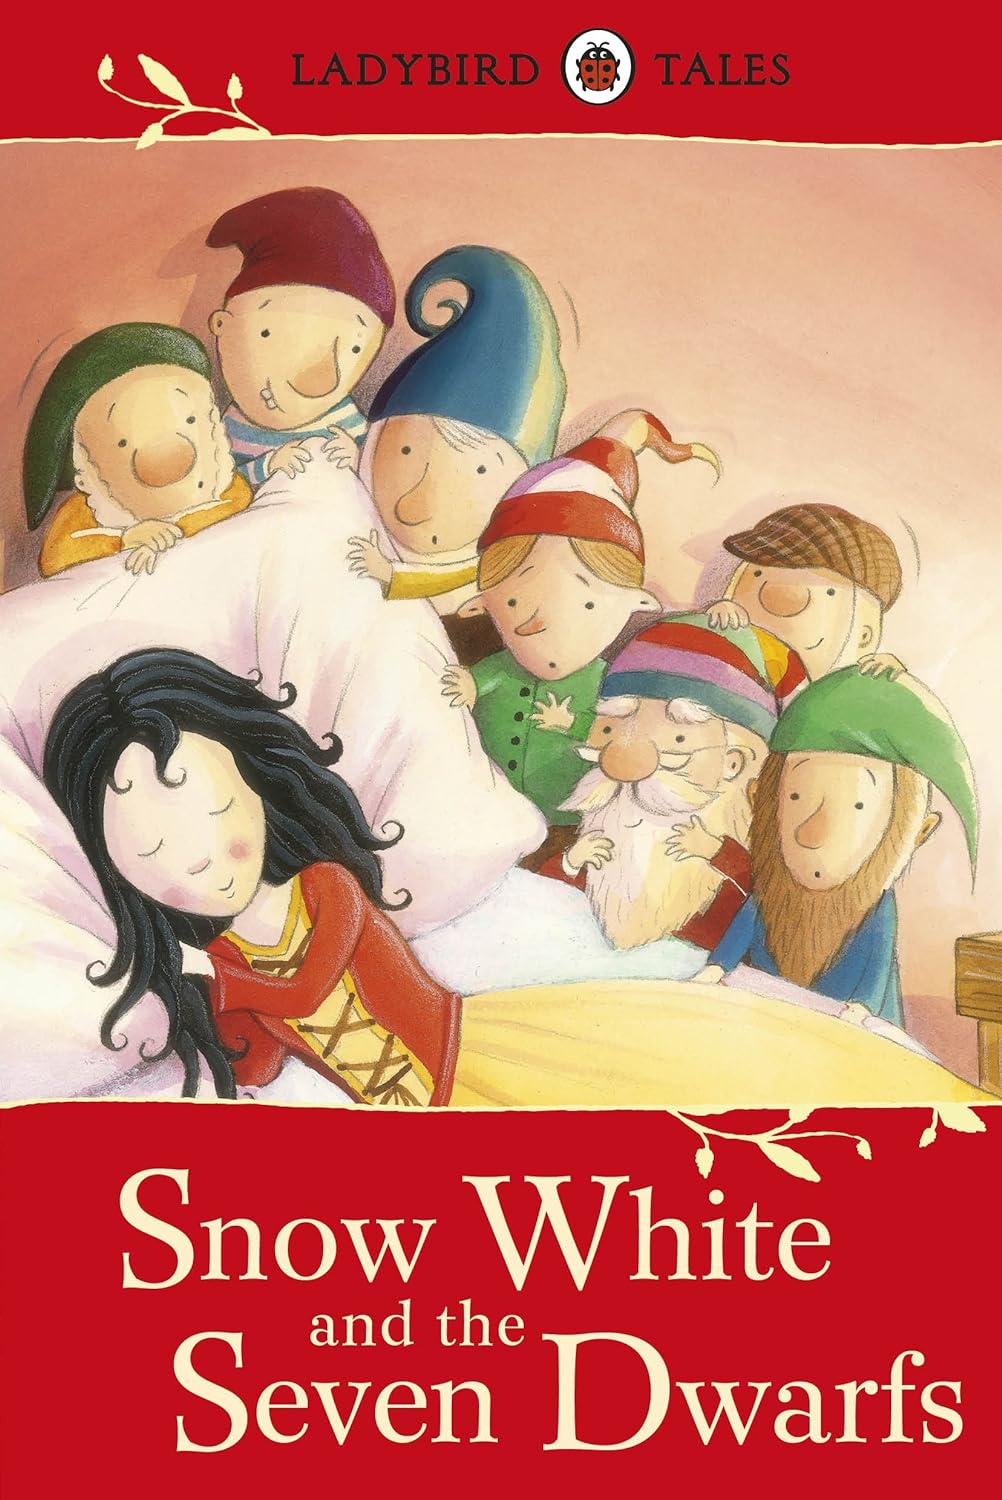 Snow White and the Seven Dwarfs - Ladybird Tales - Hard